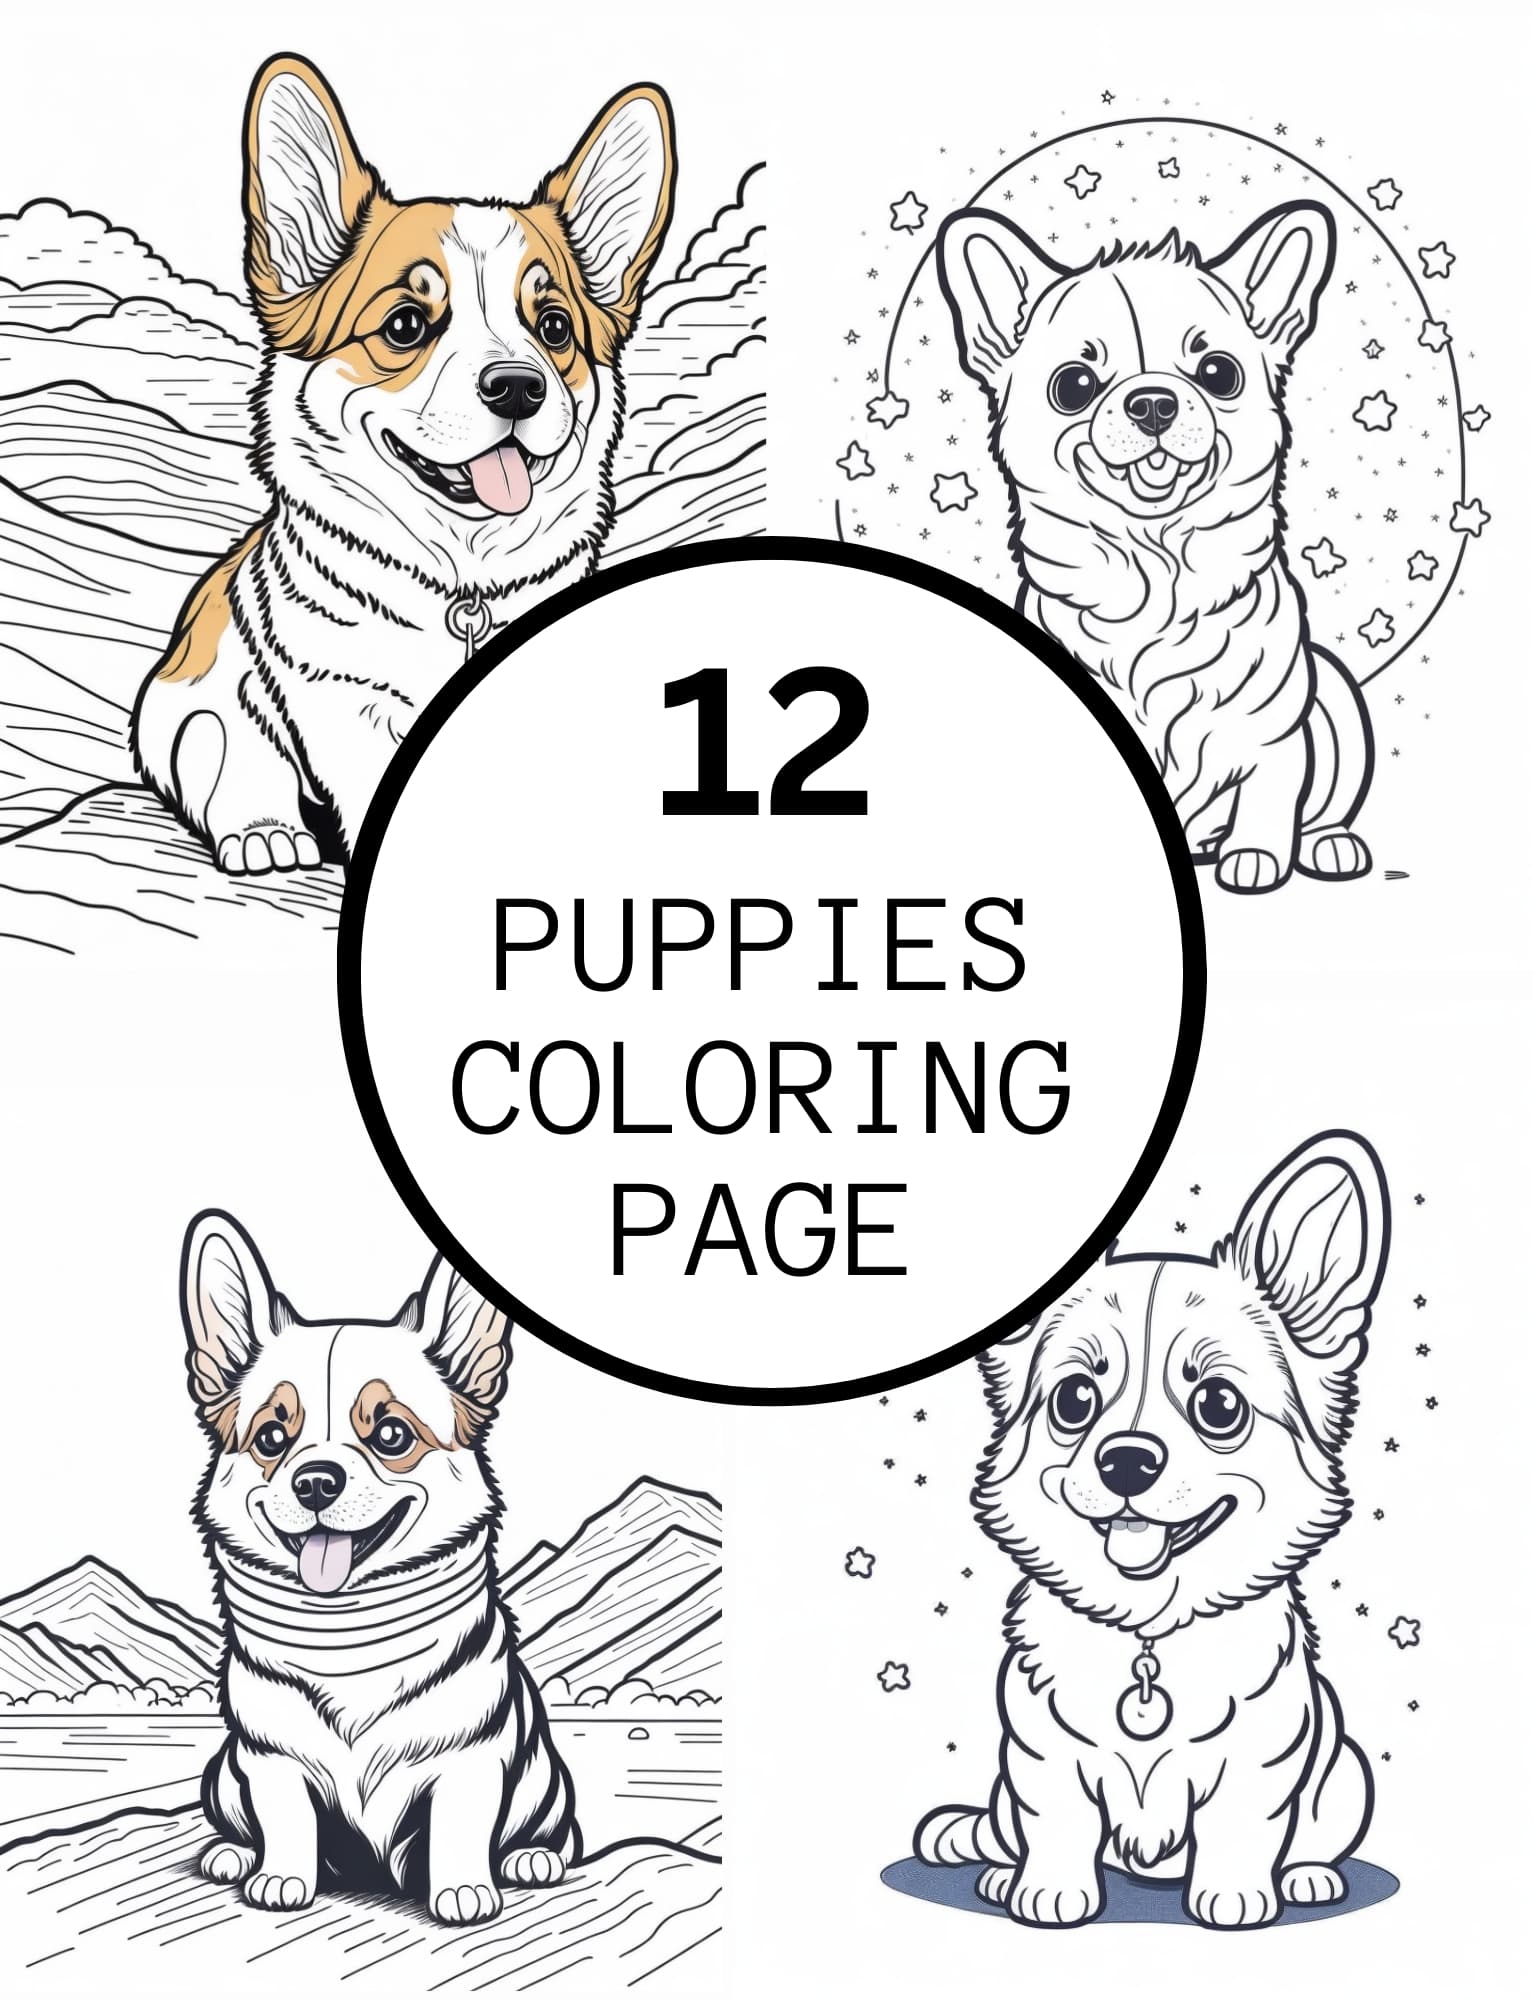 Realistic puppies coloring pages for kids and adults made by teachers